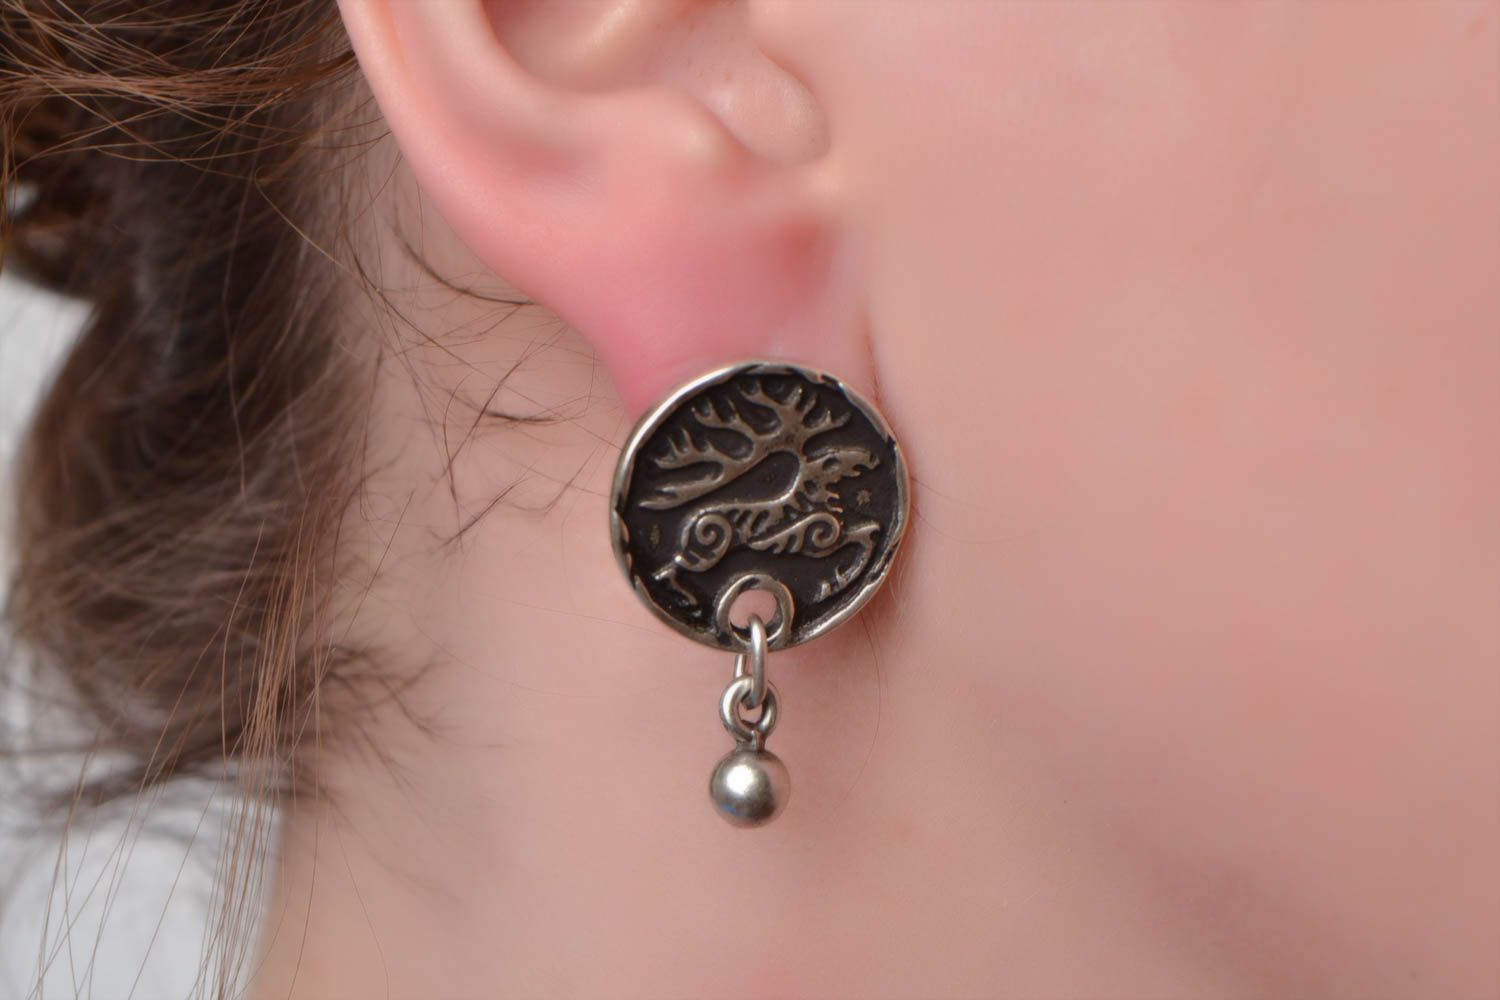 Handmade small round stud earrings cast of hypoallergenic metal with deer image photo 1